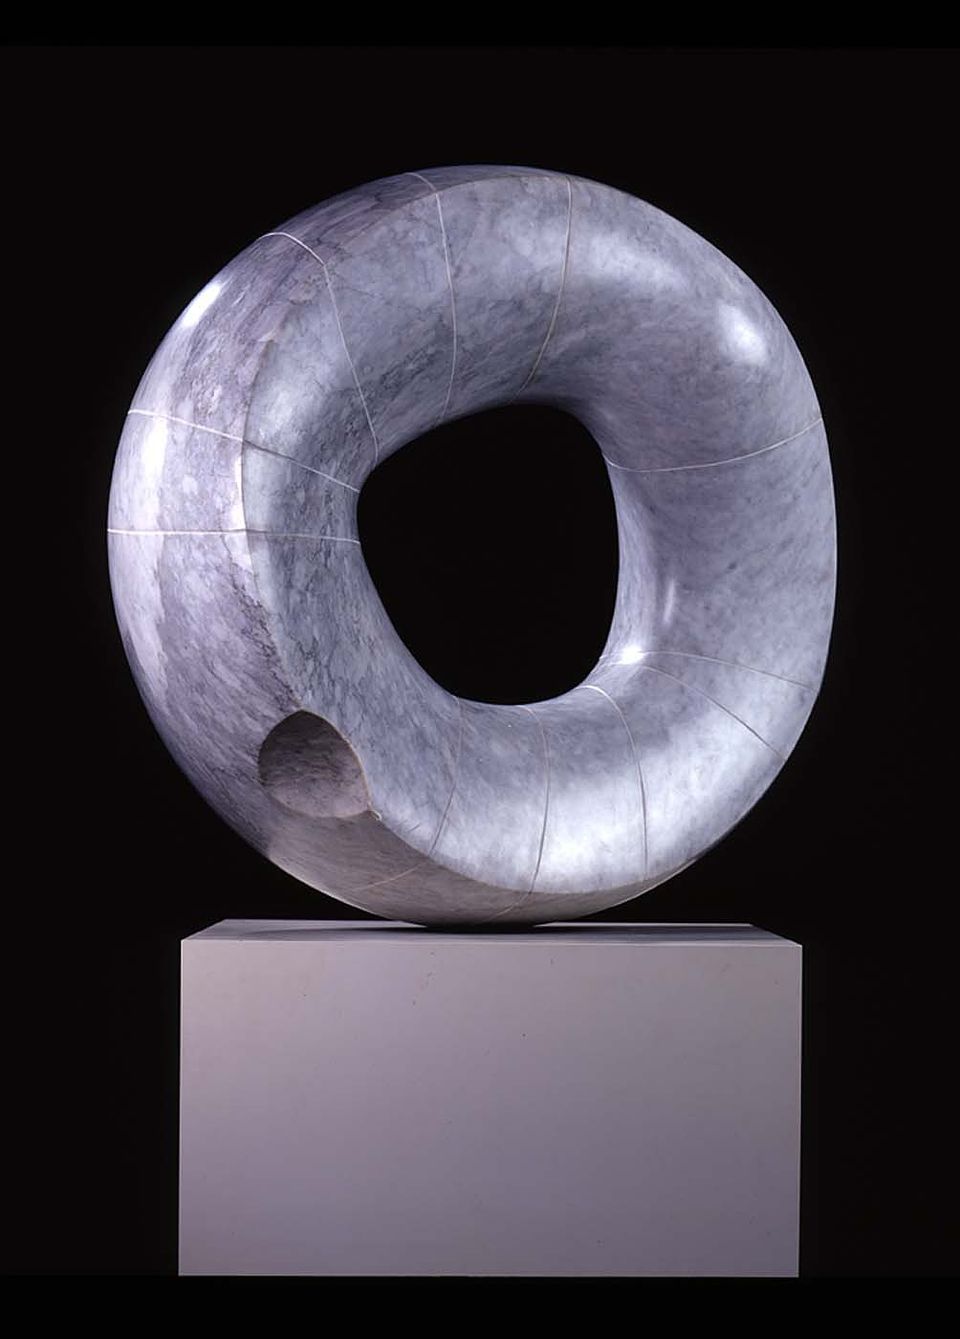 A round grey sculpture with a hole in the center  by Isamu Noguchi